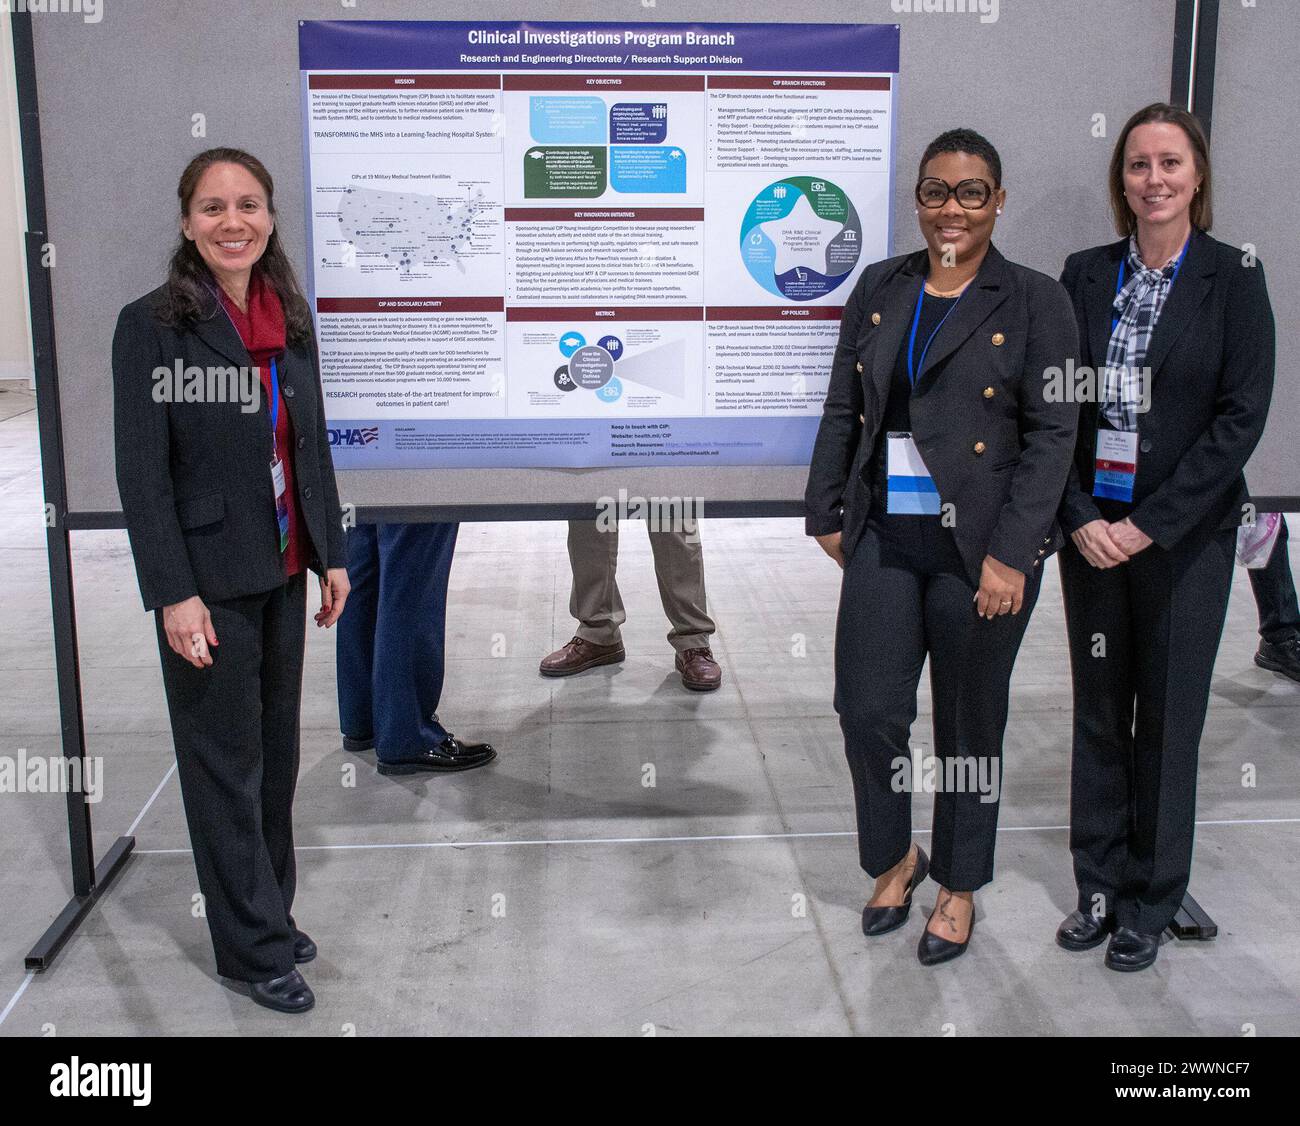 The Defense Health Agency Research and Engineering Directorate, Clinical Investigations Program Branch organized a poster presentation contest for early career scientists during the Feb. 2024 meeting of AMSUS, the Society of Federal Health Professionals, in National Harbor, Maryland. Seen here are poster presenters engaging with conference participants, in advance of a series of oral presentations during the conference. Stock Photo